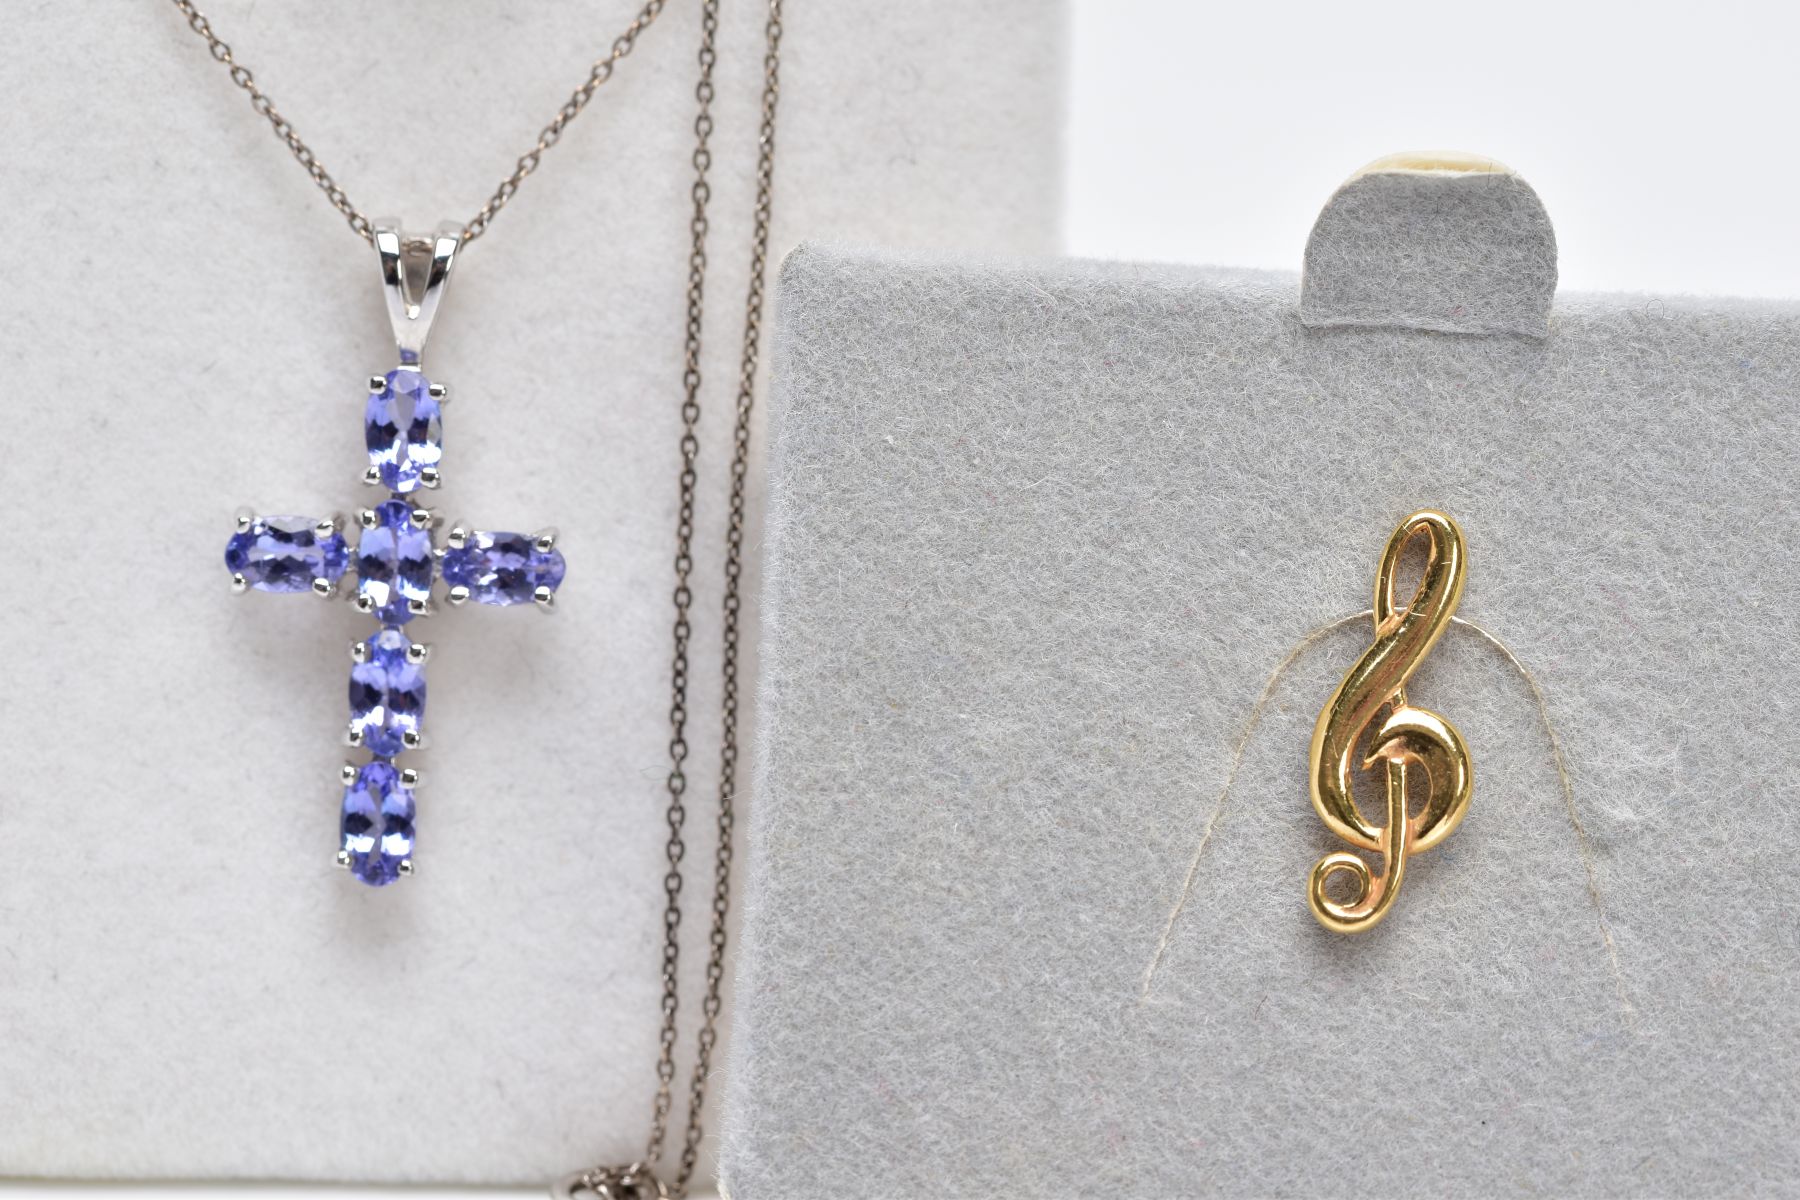 A WHITE METAL CROSS PENDANT NECKLACE AND A TIE PIN, the cross pendant set with six oval cut pale